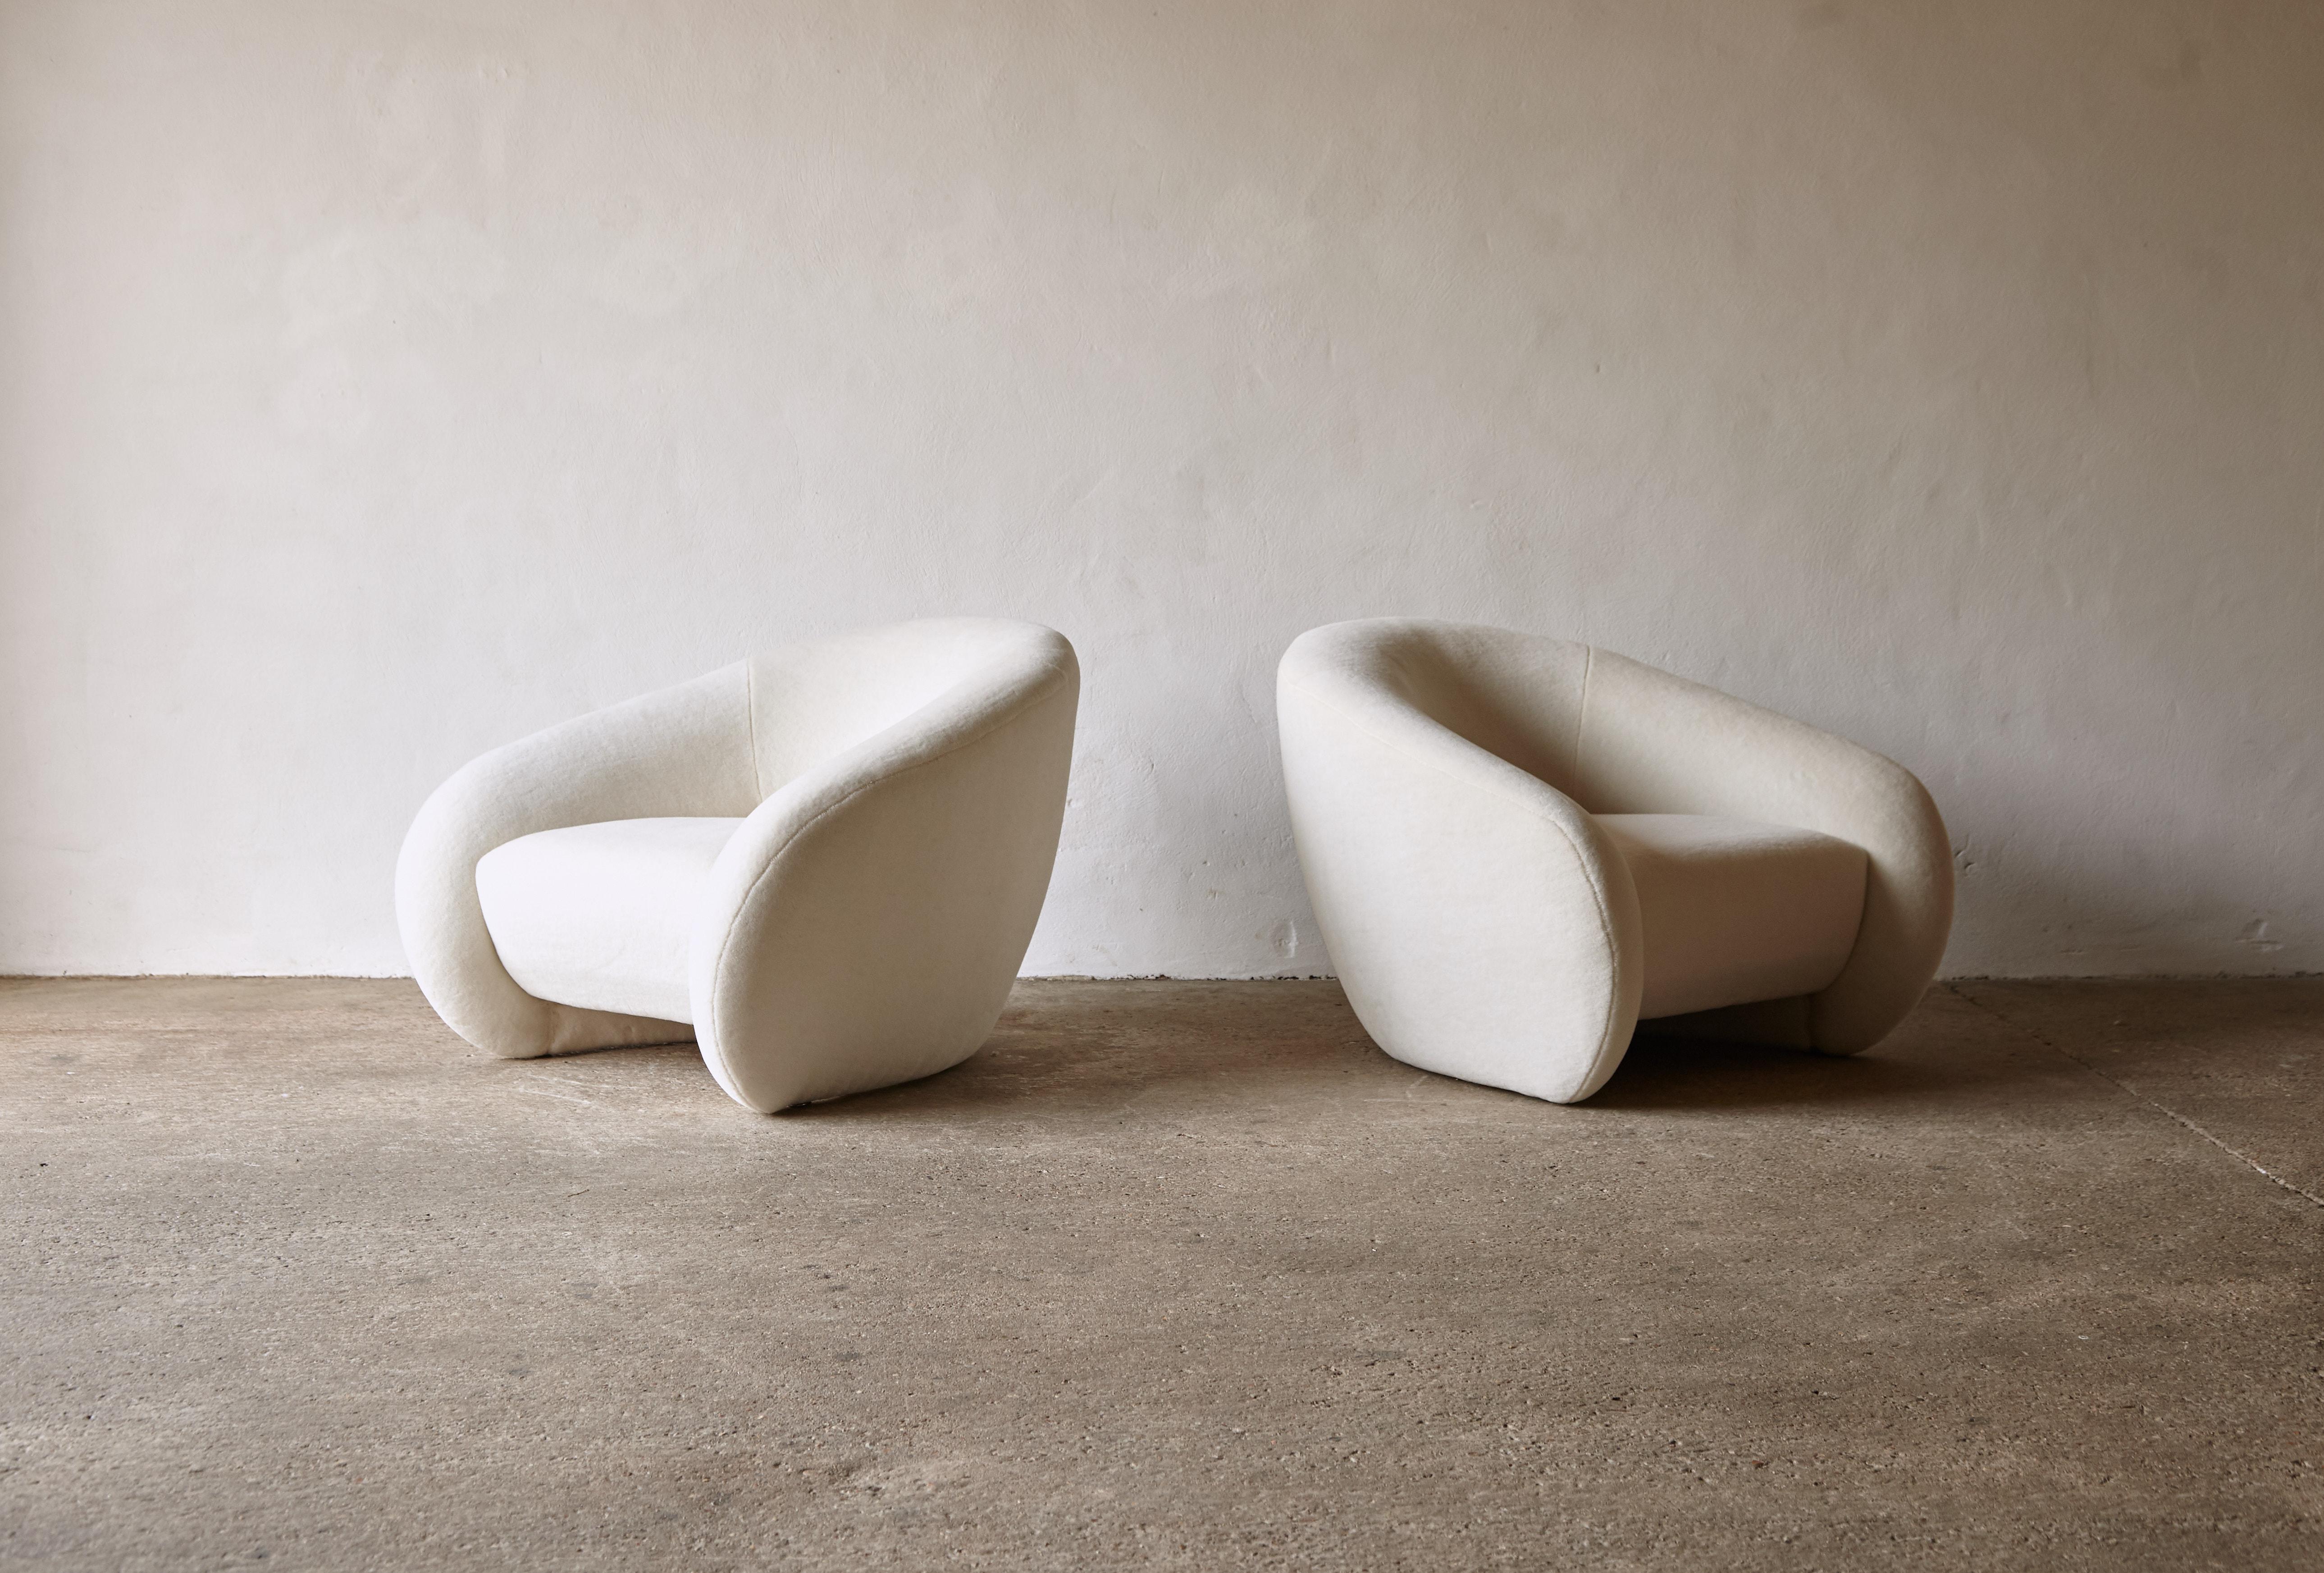 A superb pair of curved organic form armchairs, Italian design, newly upholstered in a premium pure 100% alpaca wool fabric. Fast shipping worldwide.
  



UK customers please note: Prices do not include VAT.